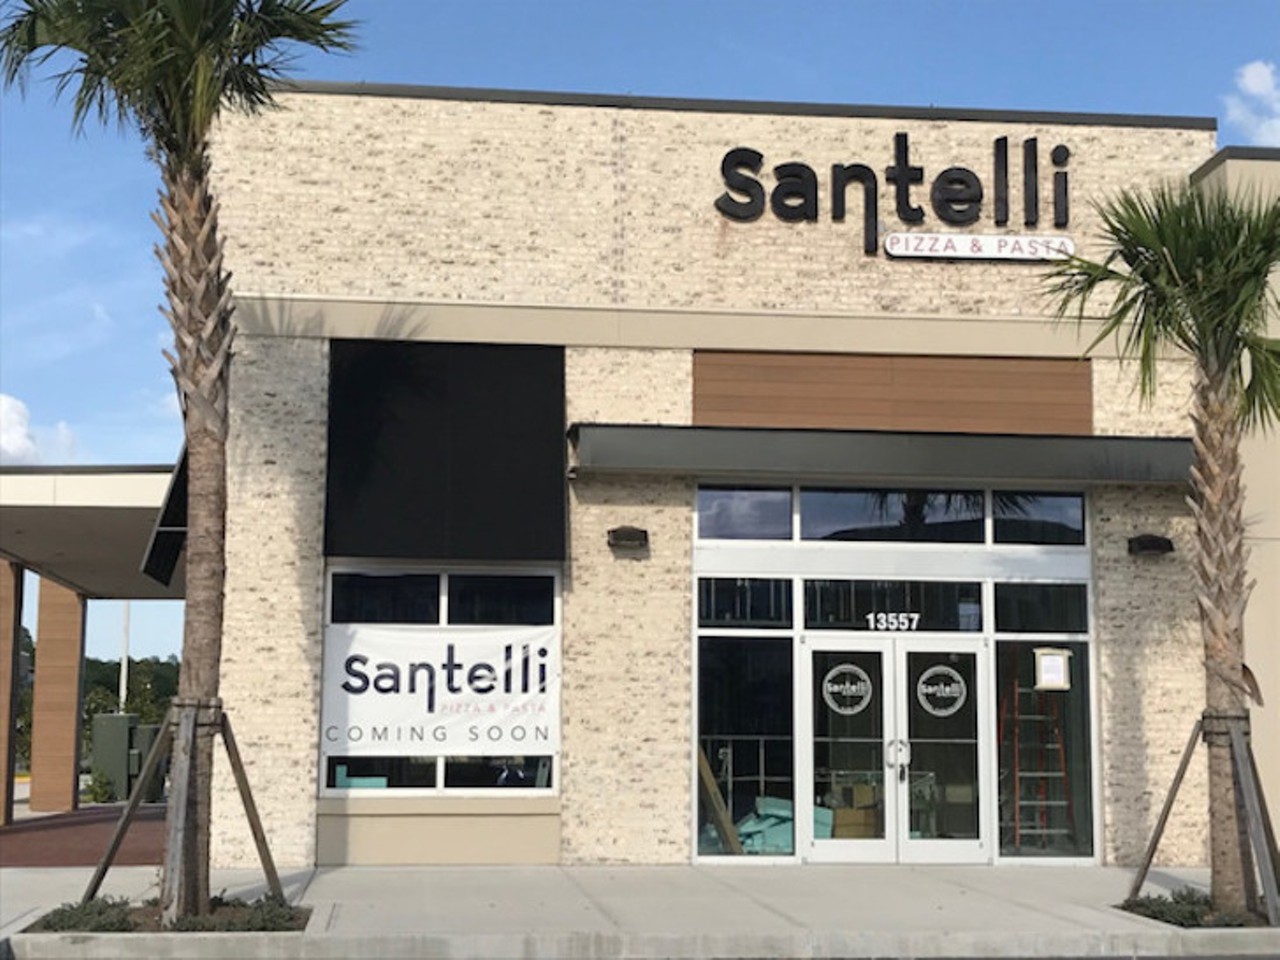 Santelli&#146;s Pizza & Pasta
13557 SR-54, Odessa
Coming to Odessa soon is family-owned Santelli&#146;s. This fast-casual restaurant will serve iconic Italian dishes. That means calzones, zeppole, pasta with housemade sauces and New York-style pizzas. Once open, customers can dine inside or on the patio lined with Italian Cypress trees.
Photo via Santelli&#146;s Pizza & Pasta